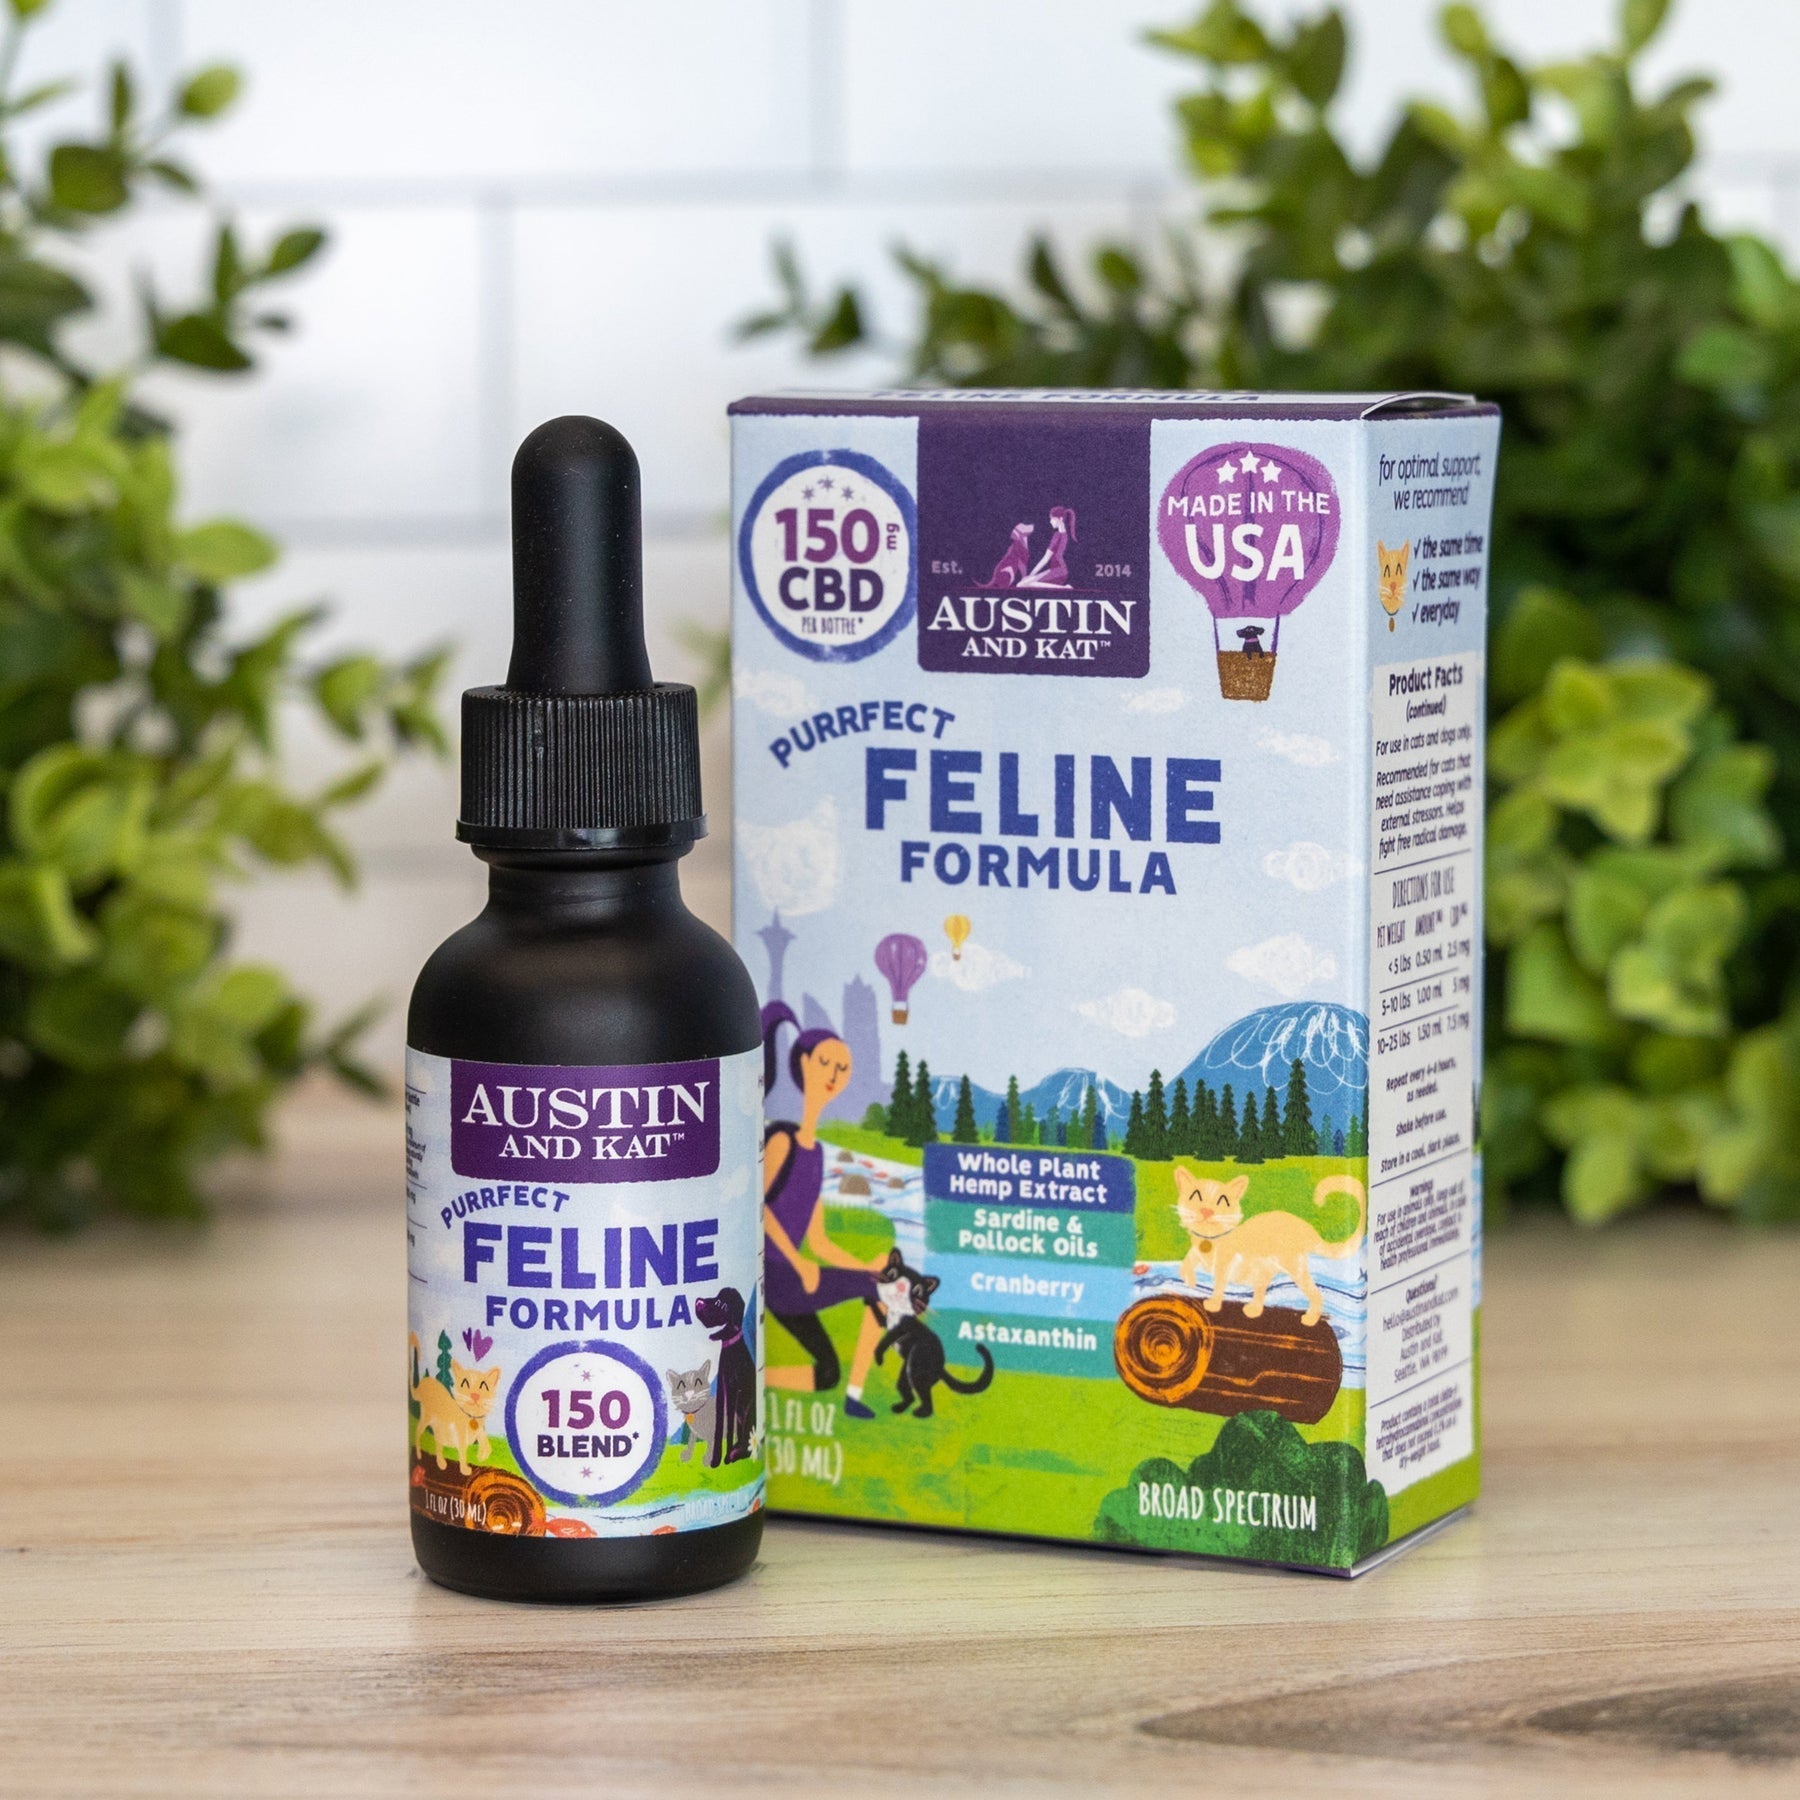 Austin and Kat Hemp Tinctures for Dogs and Cats Purrfect Feline 150mg